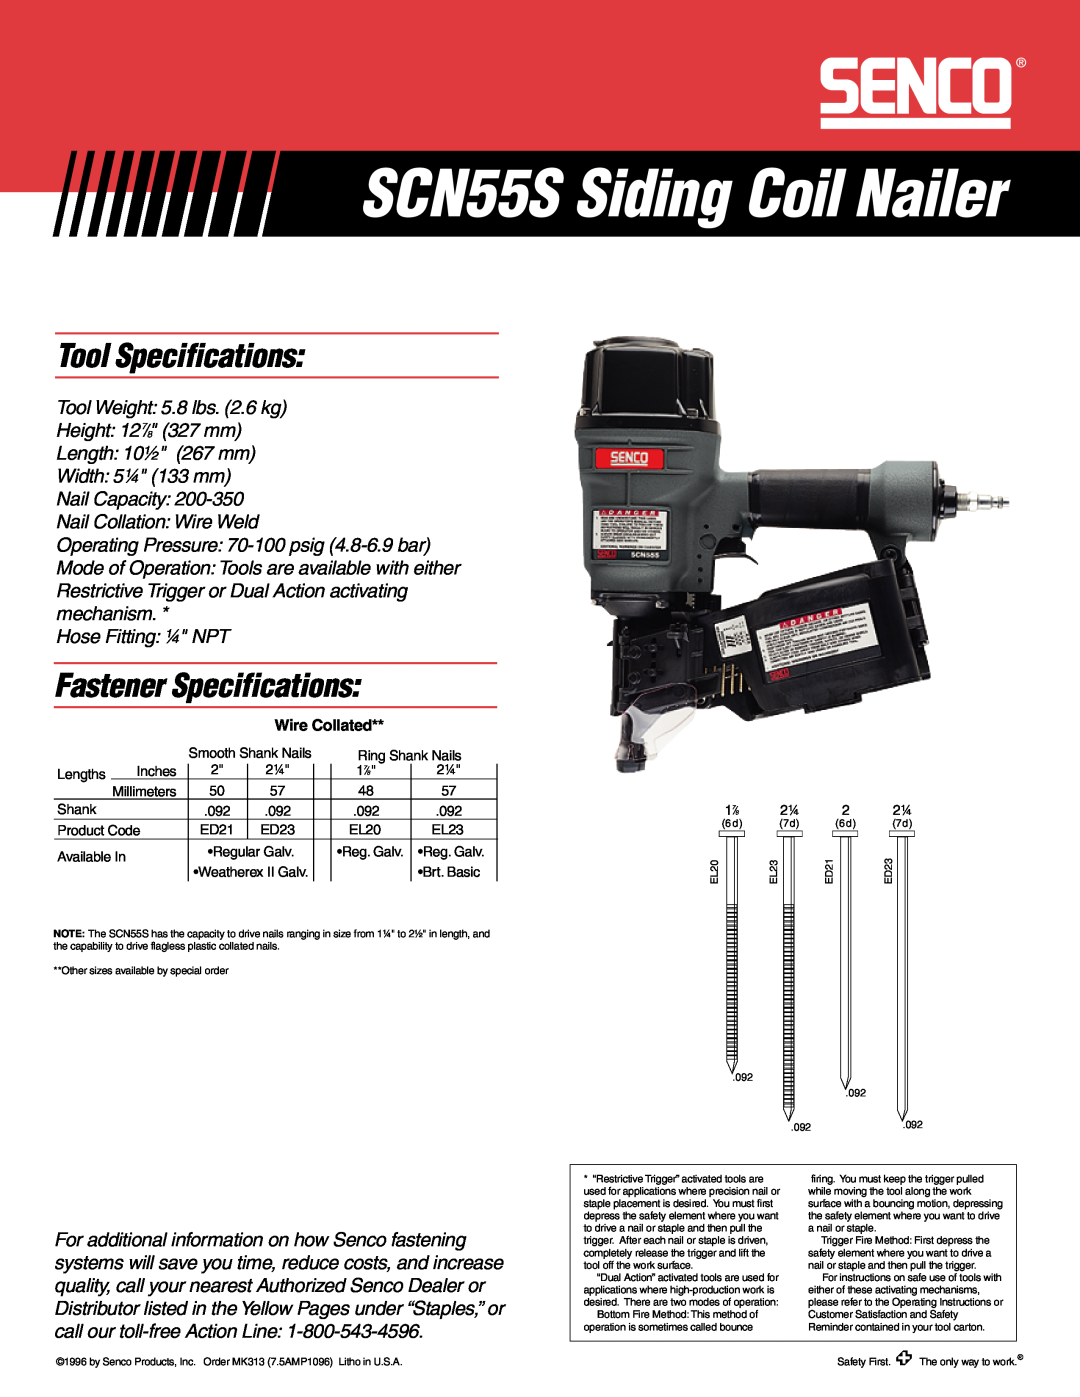 Senco Tool Specifications, Fastener Specifications, SCN55S Siding Coil Nailer, Hose Fitting ¼ NPT, Wire Collated 